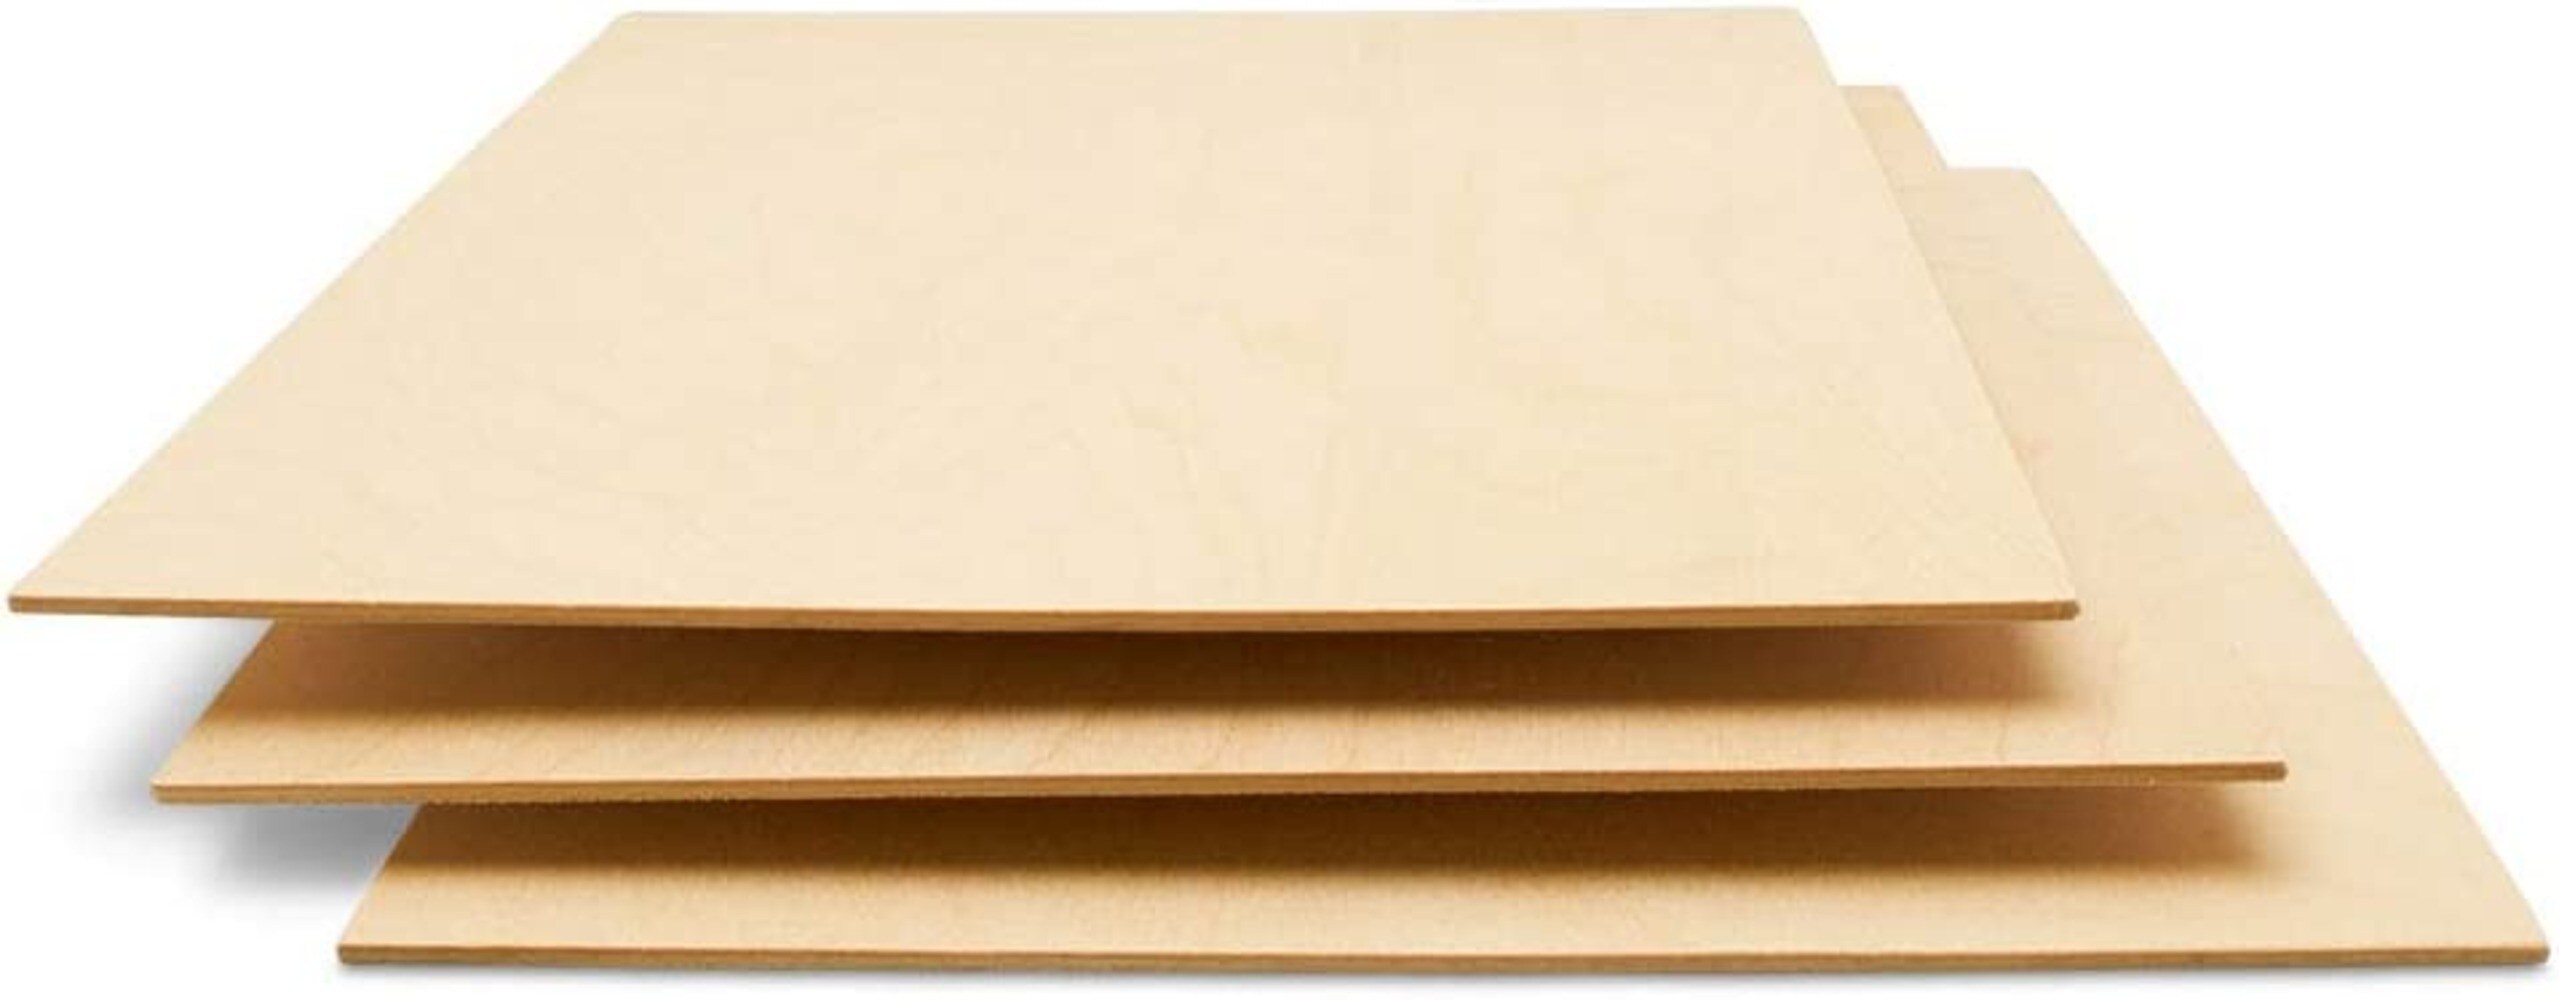 BALTIC BIRCH PLYWOOD 1/8 (3mm) BY APPROX 11 7/8 X 11 7/8 40 PIECE SUPER  PACK